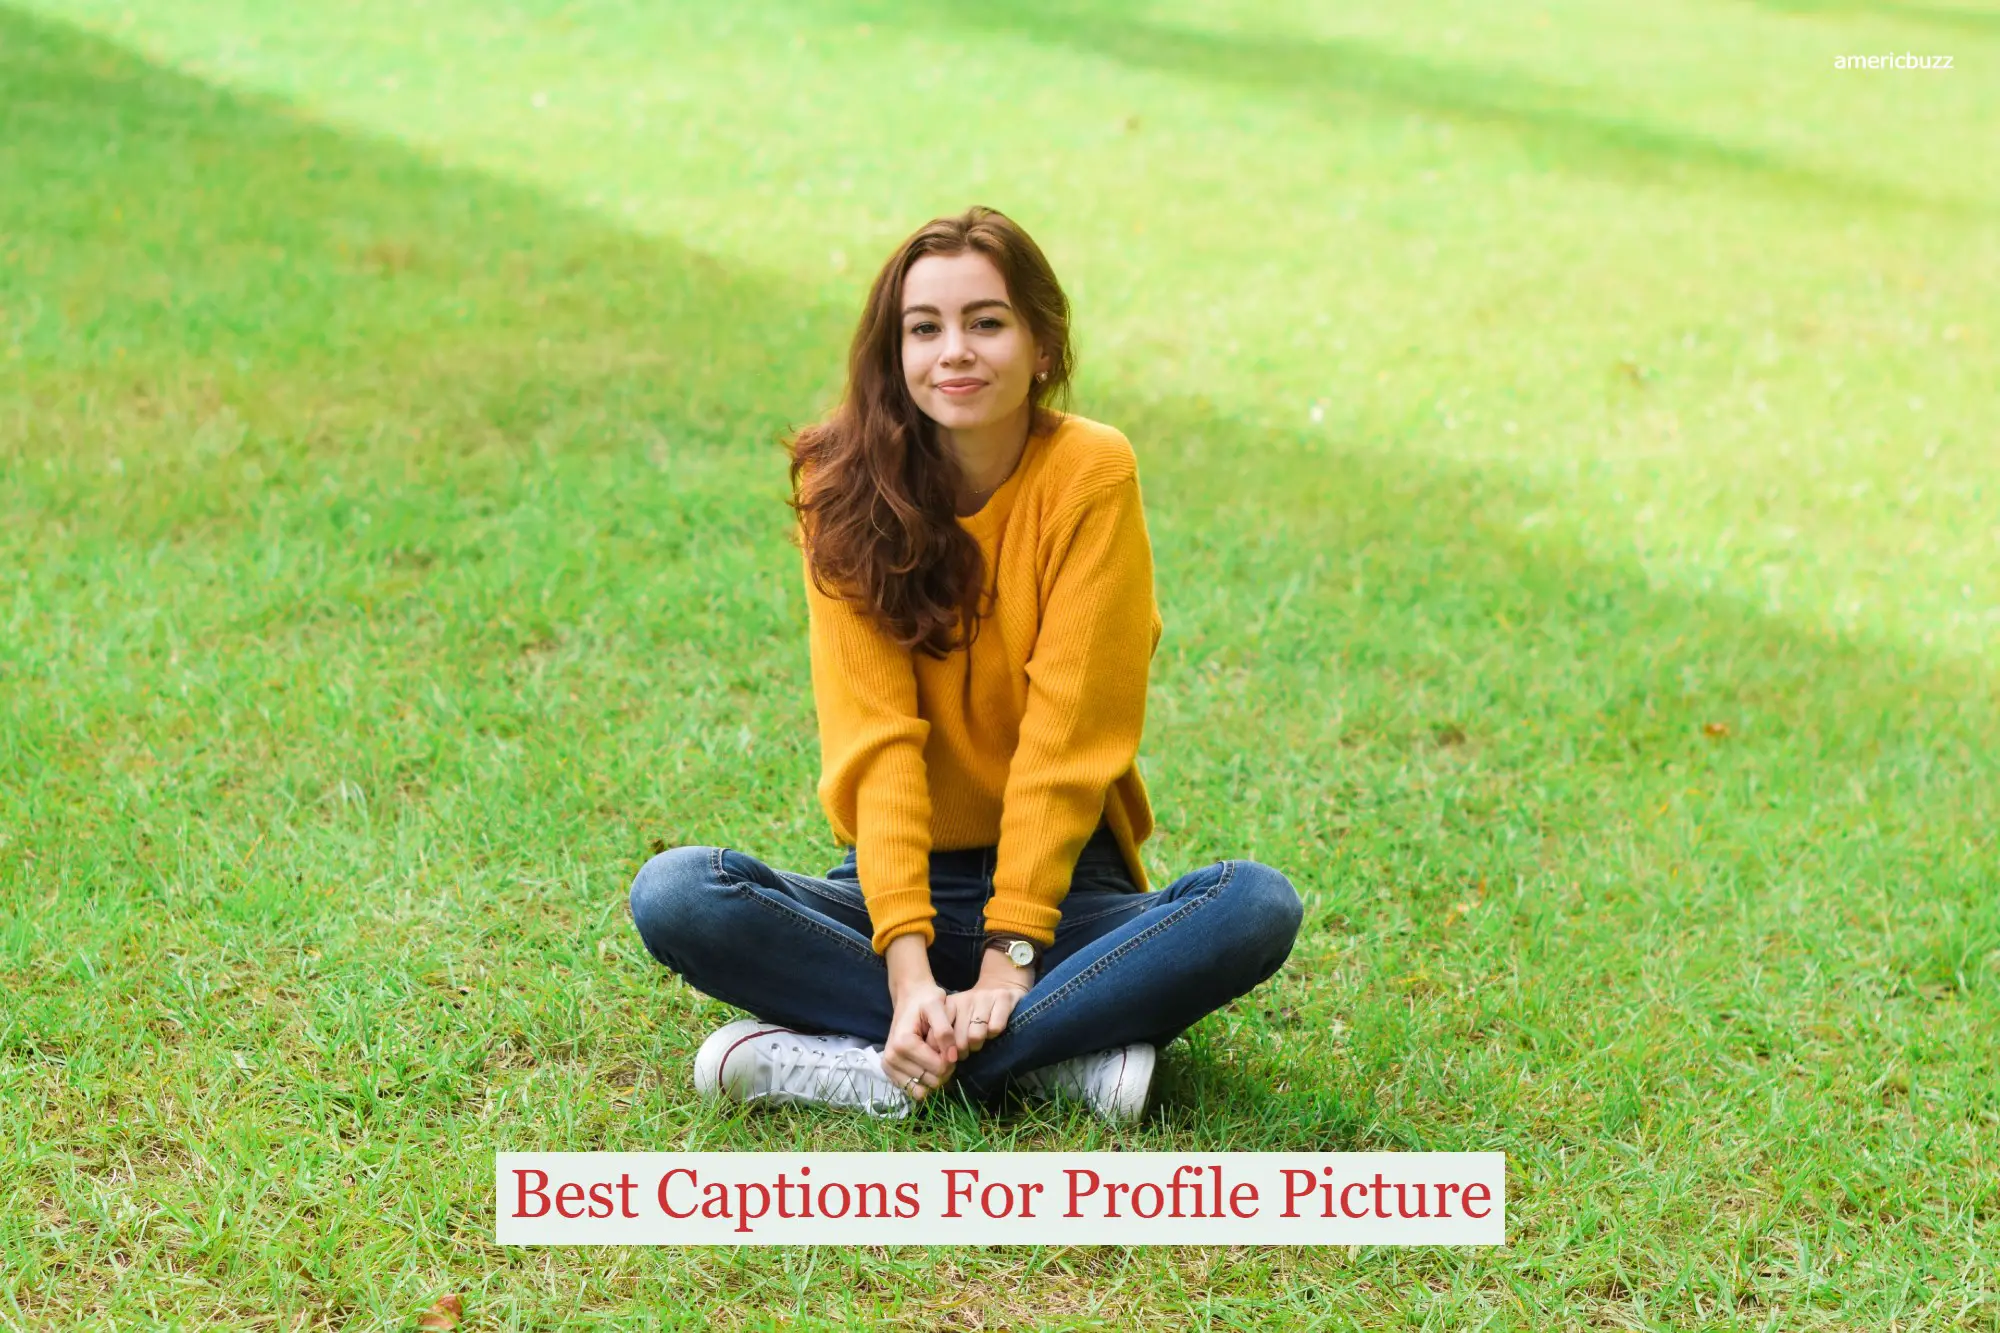 Best Captions For Profile Picture